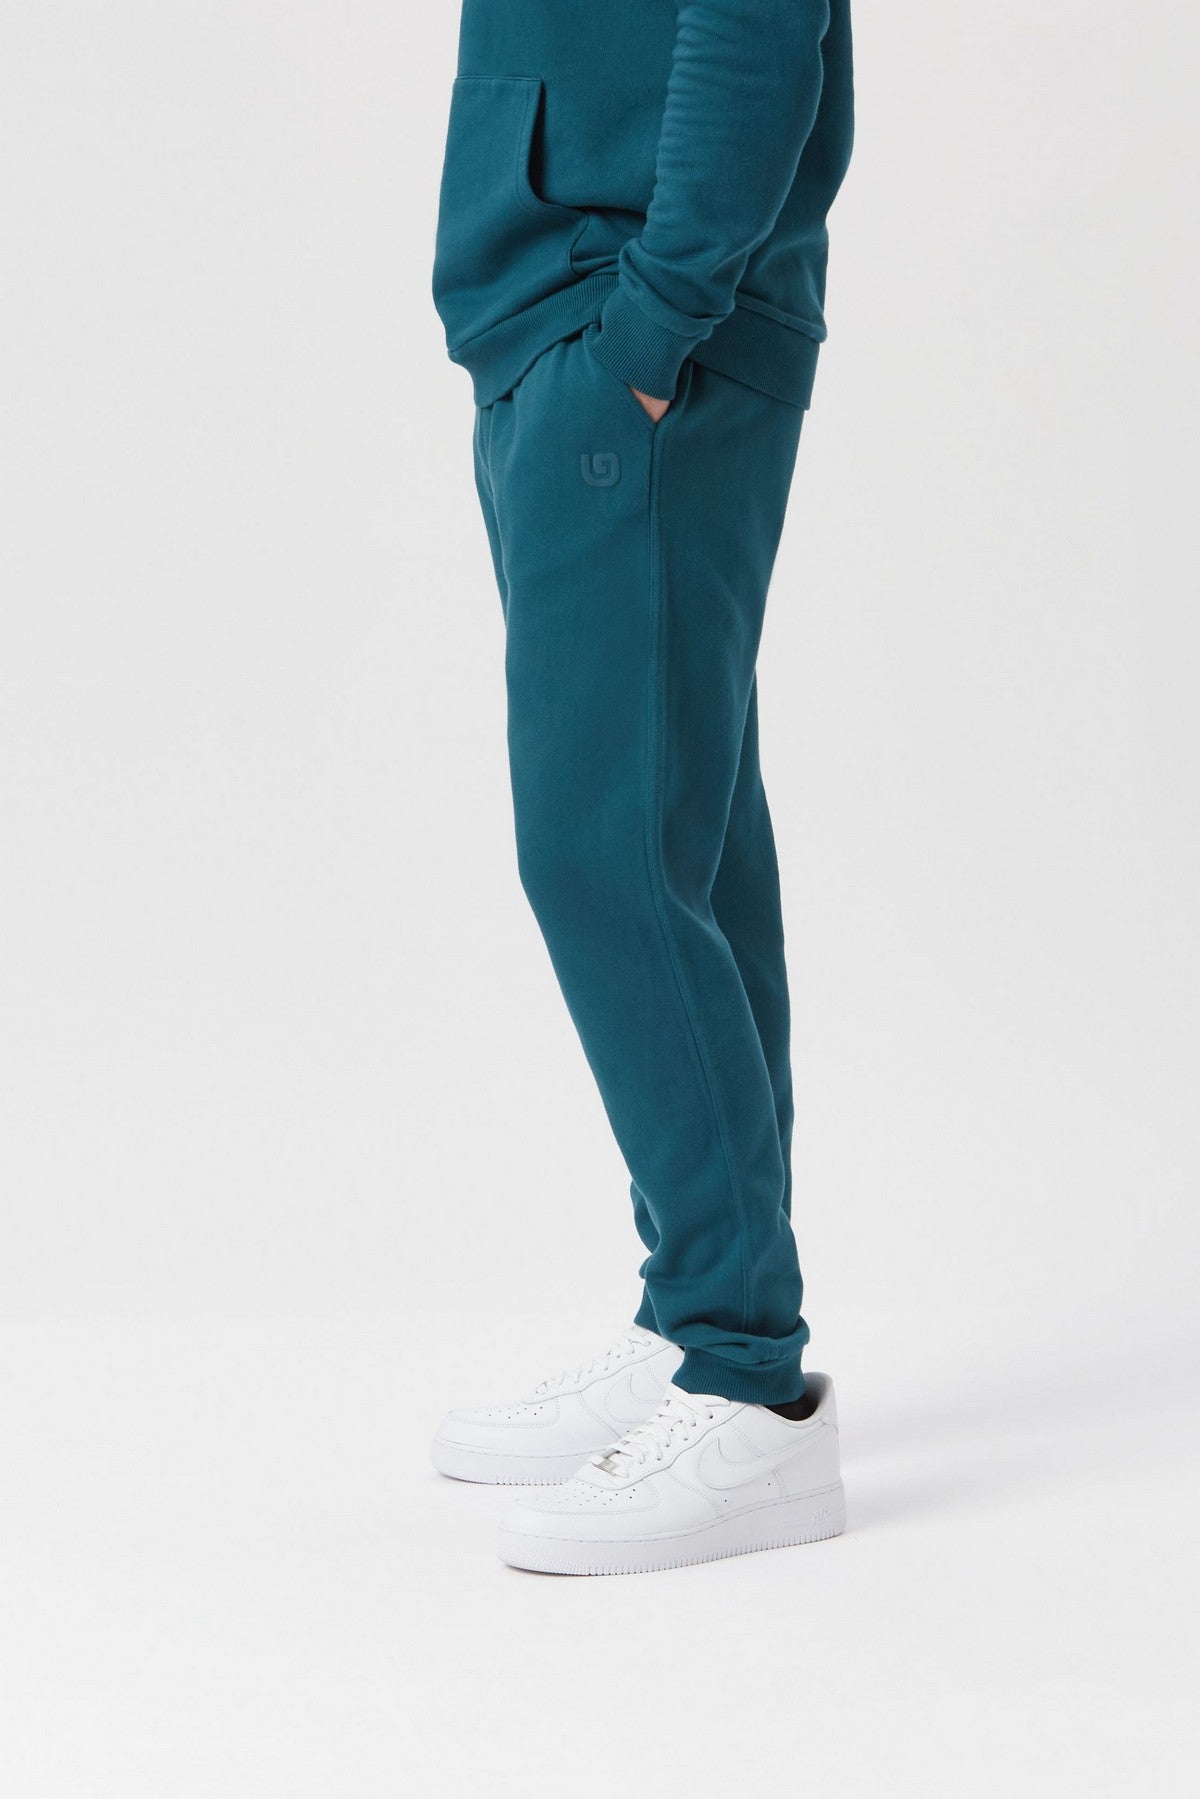 MAJI 'G' COLLECTION JOGGERS - DEEP TEAL - THAT GORILLA BRAND